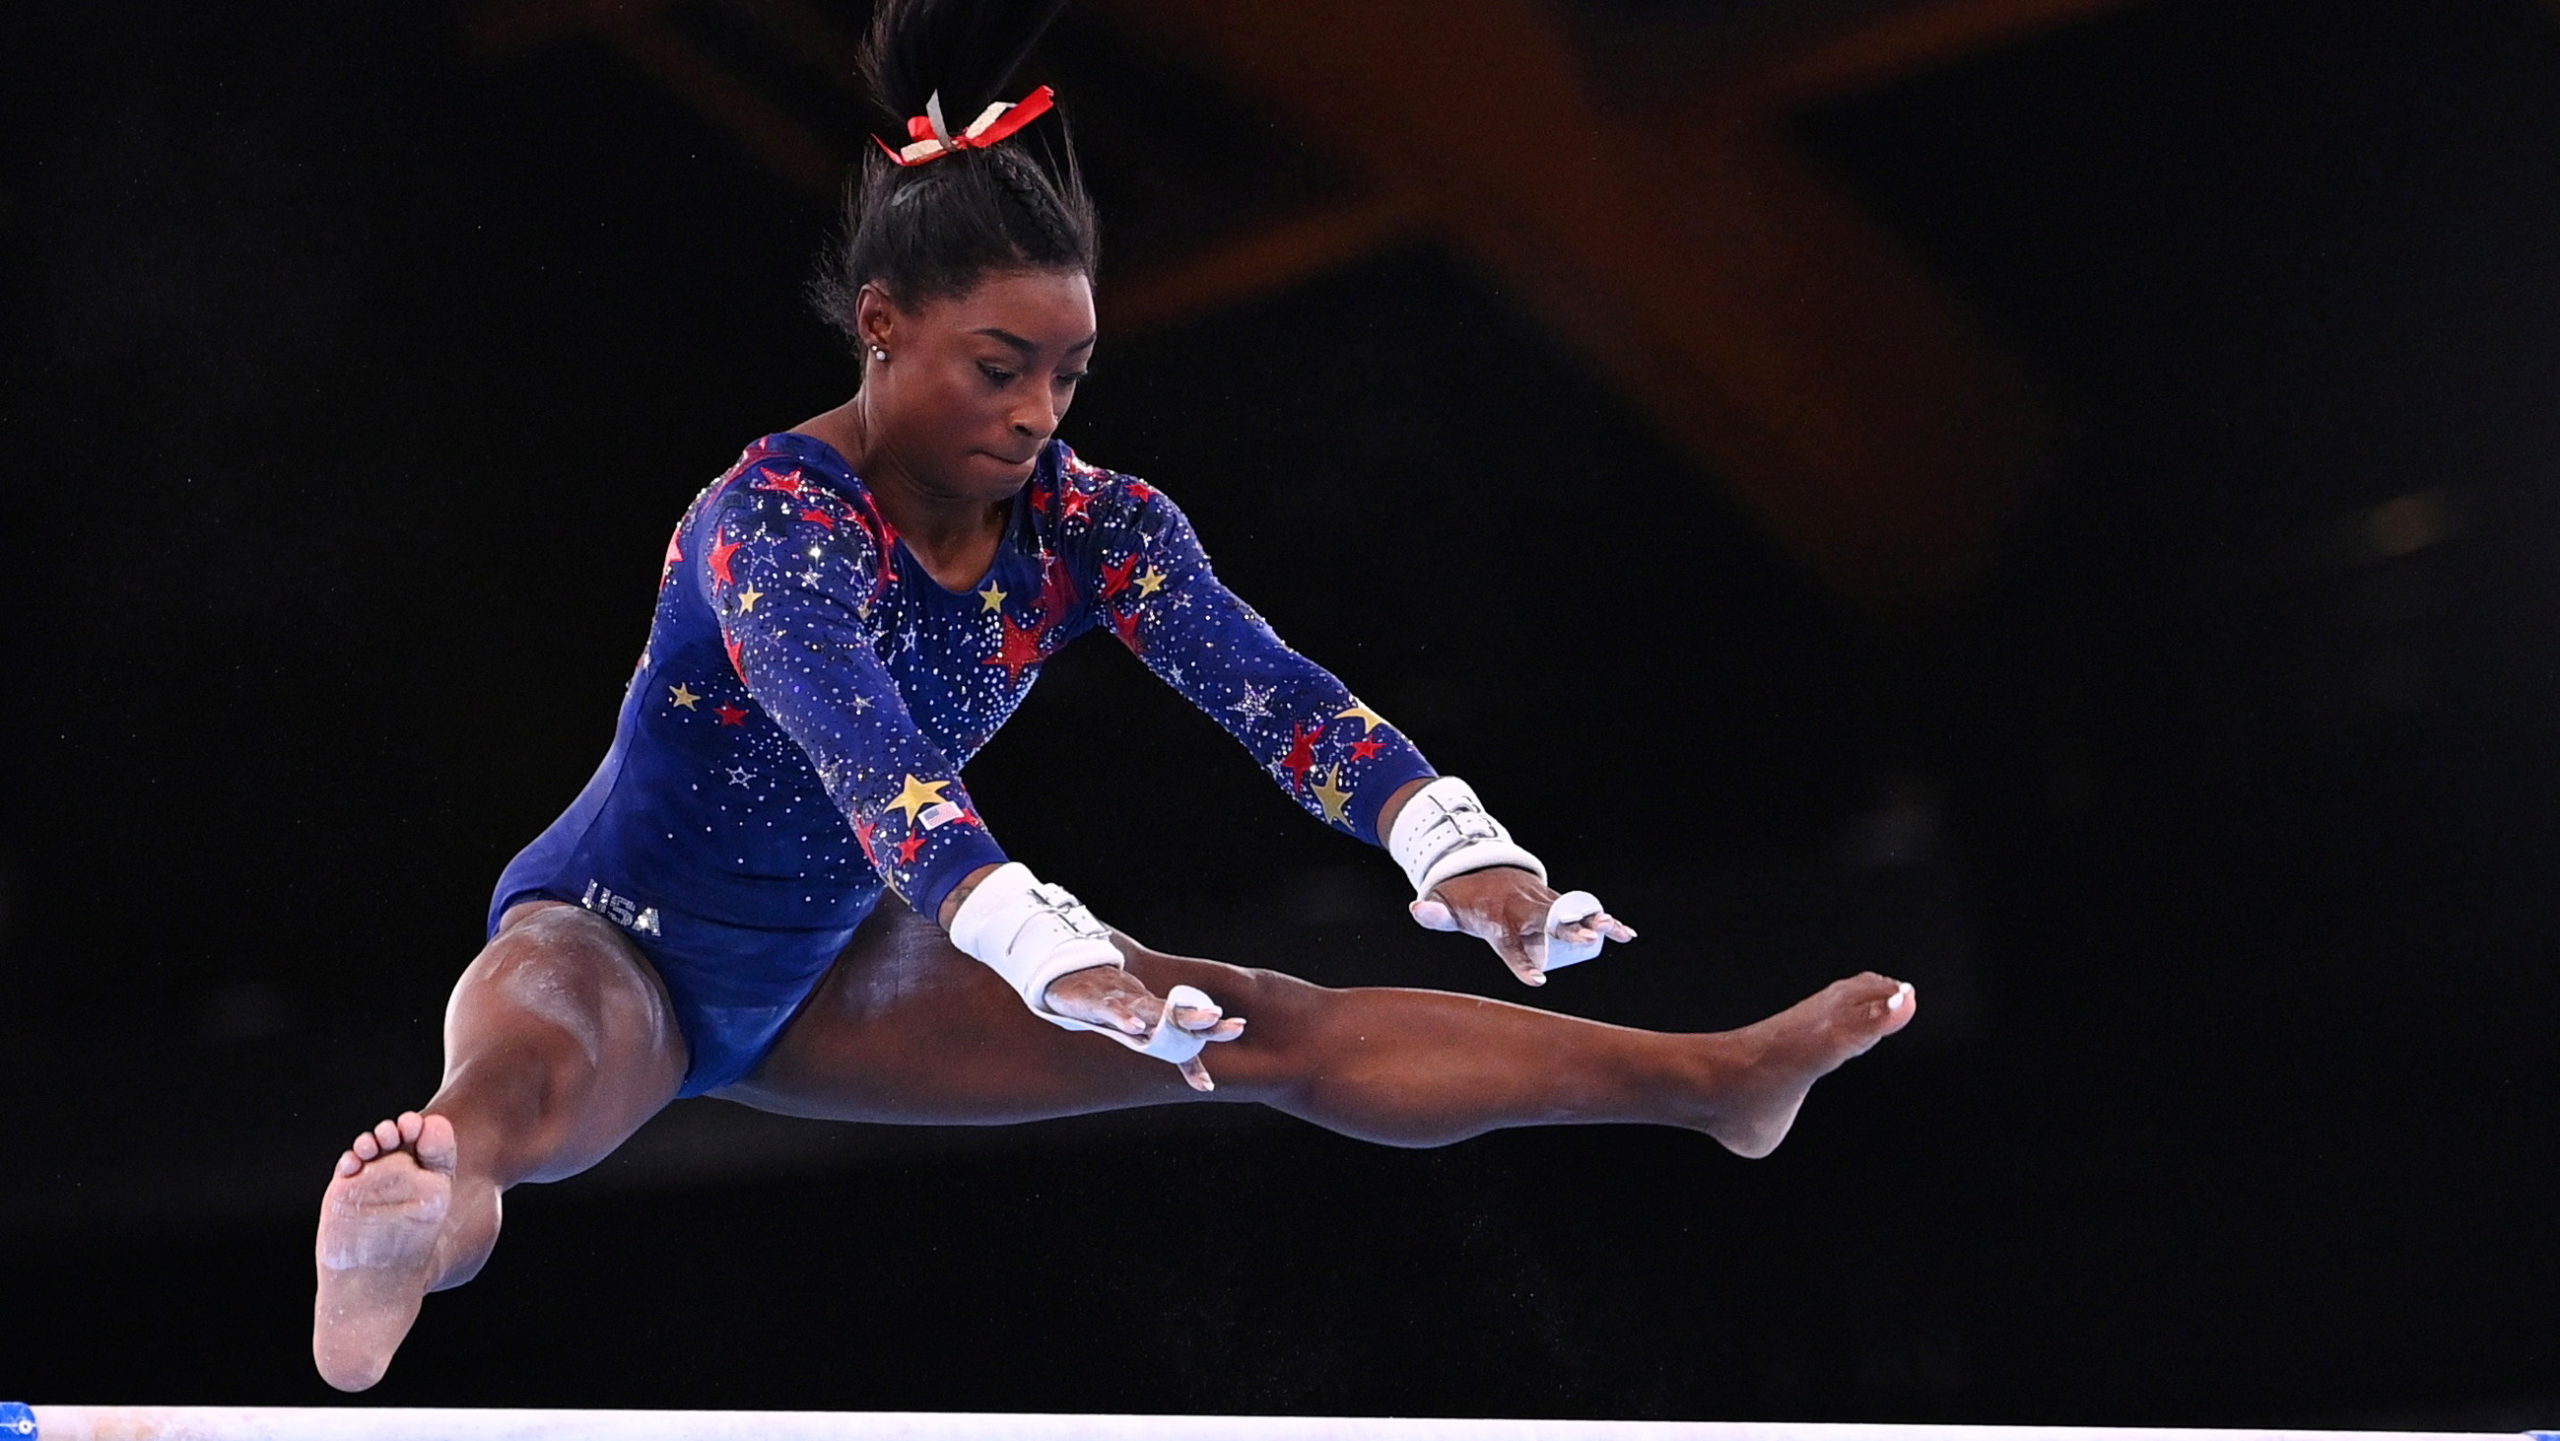 Tokyo 2020 Olympics - Gymnastics - Artistic - Women's Uneven Bars - Qualification - Ariake Gymnastics Centre, Tokyo, Japan - July 25, 2021. Simone Biles of the United States in action on the uneven bars. REUTERS/Dylan Martinez